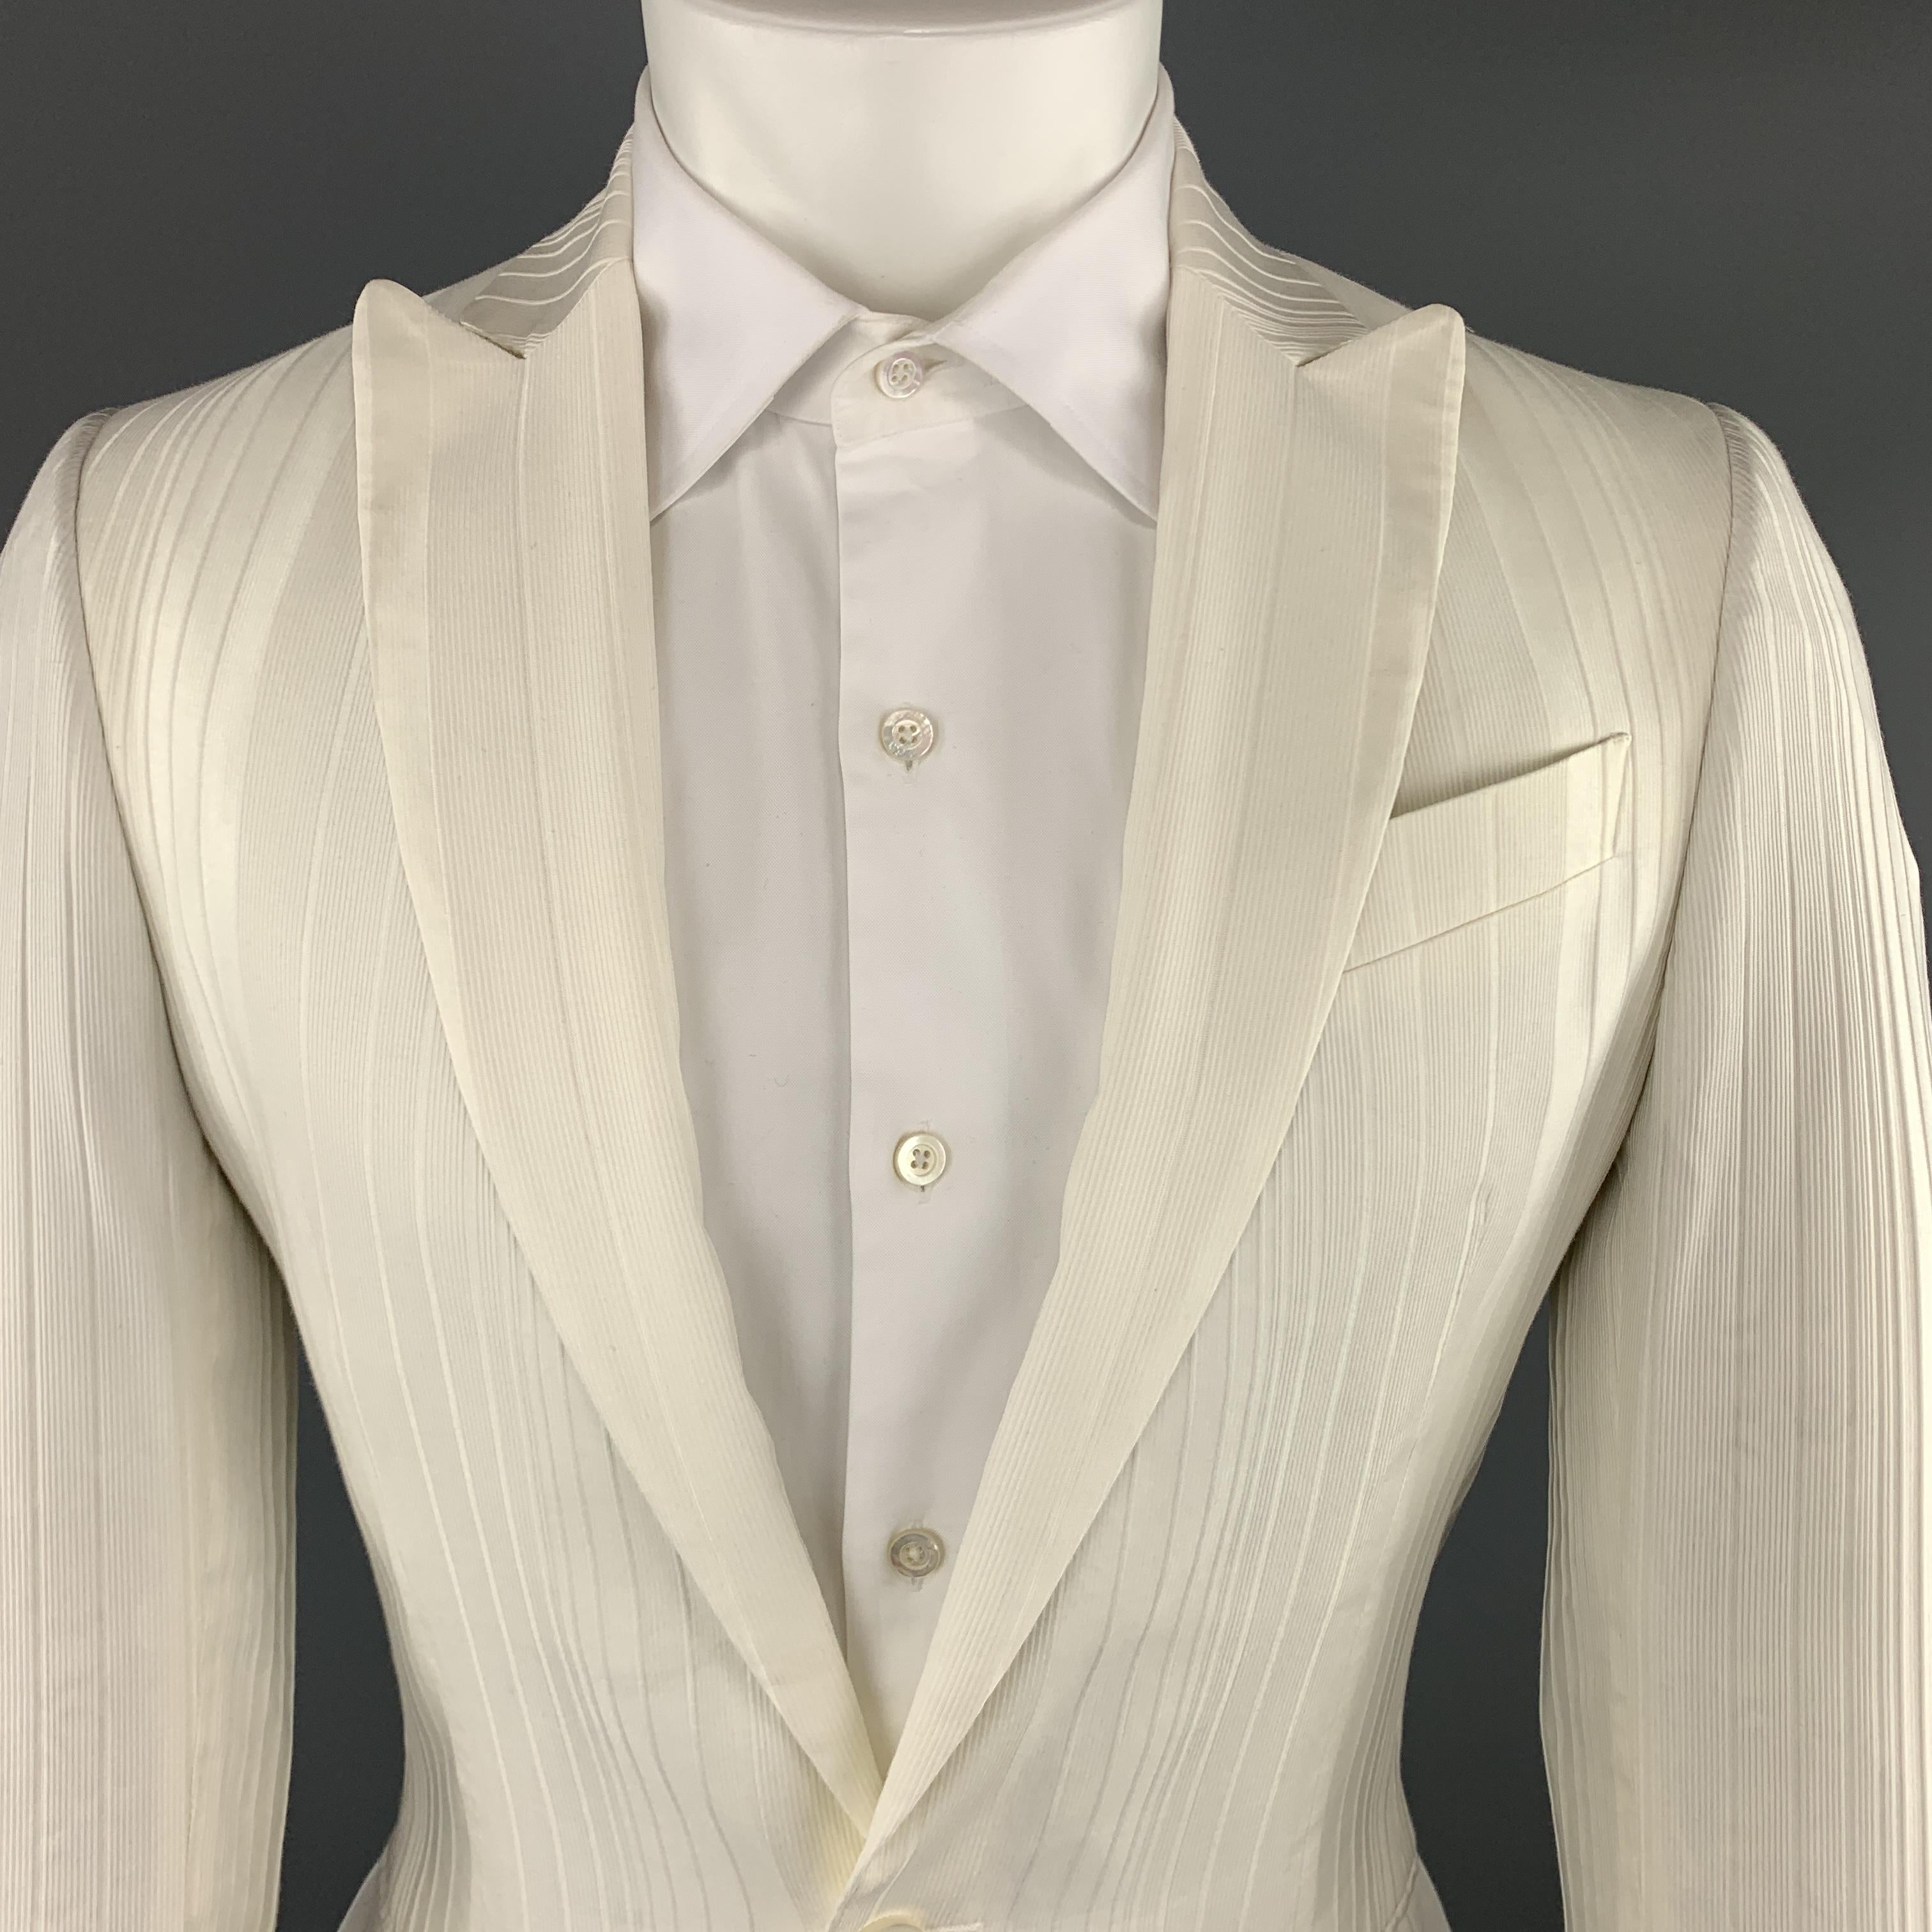 JUST CAVALLI by ROBERTO CAVALLI sport coat comes in cream stripe textured cotton blend fabric with peak lapel, single breasted, two button front, and white snake print liner. Made in Italy.

Excellent Pre-Owned Condition.
Marked: IT